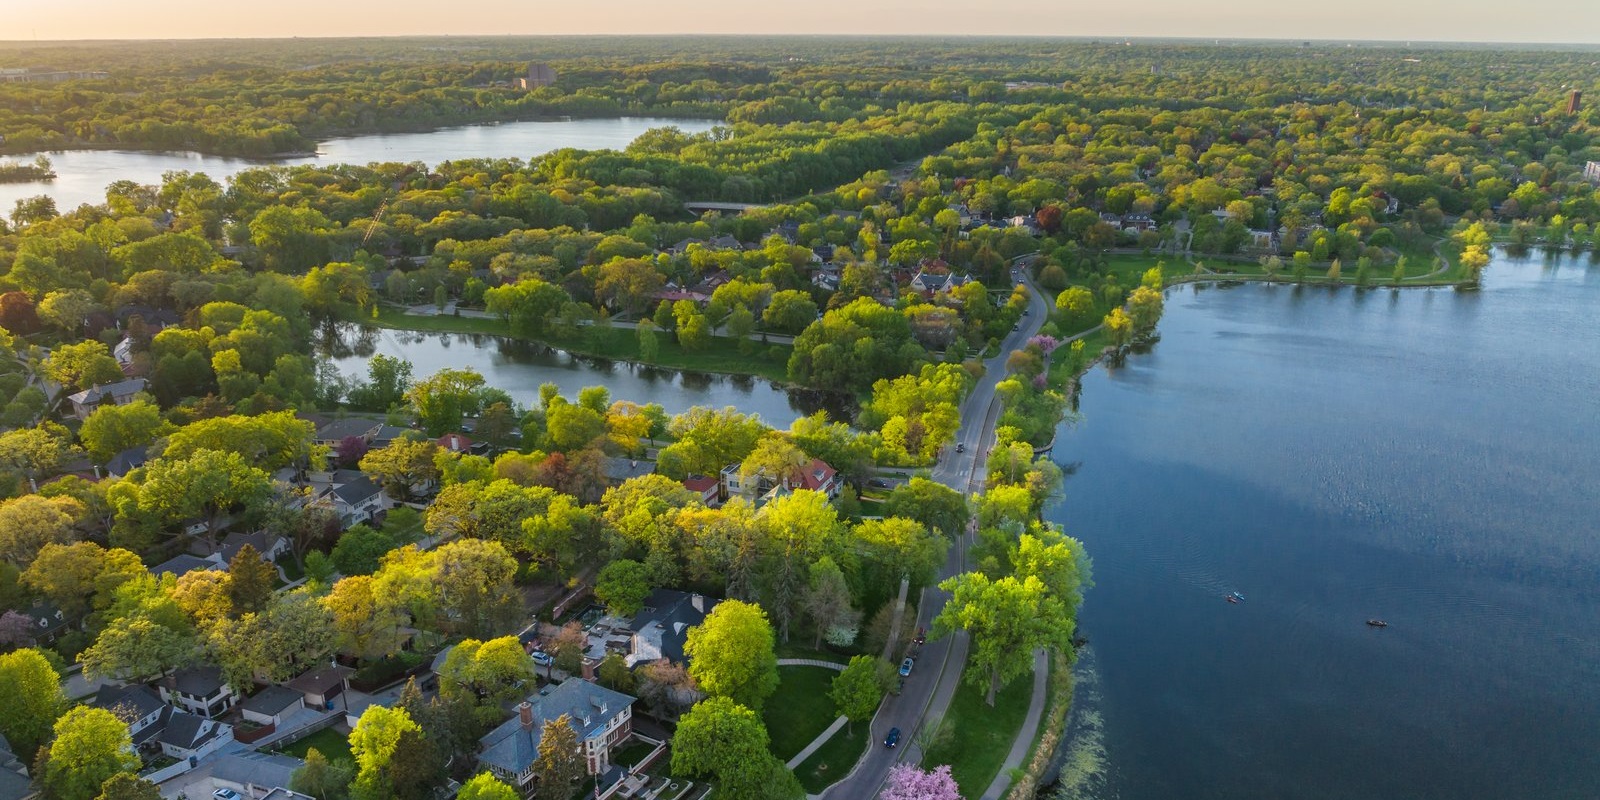 Aerial view of Lake of the Isles and trees. Image courtesy of Meet Minneapolis.